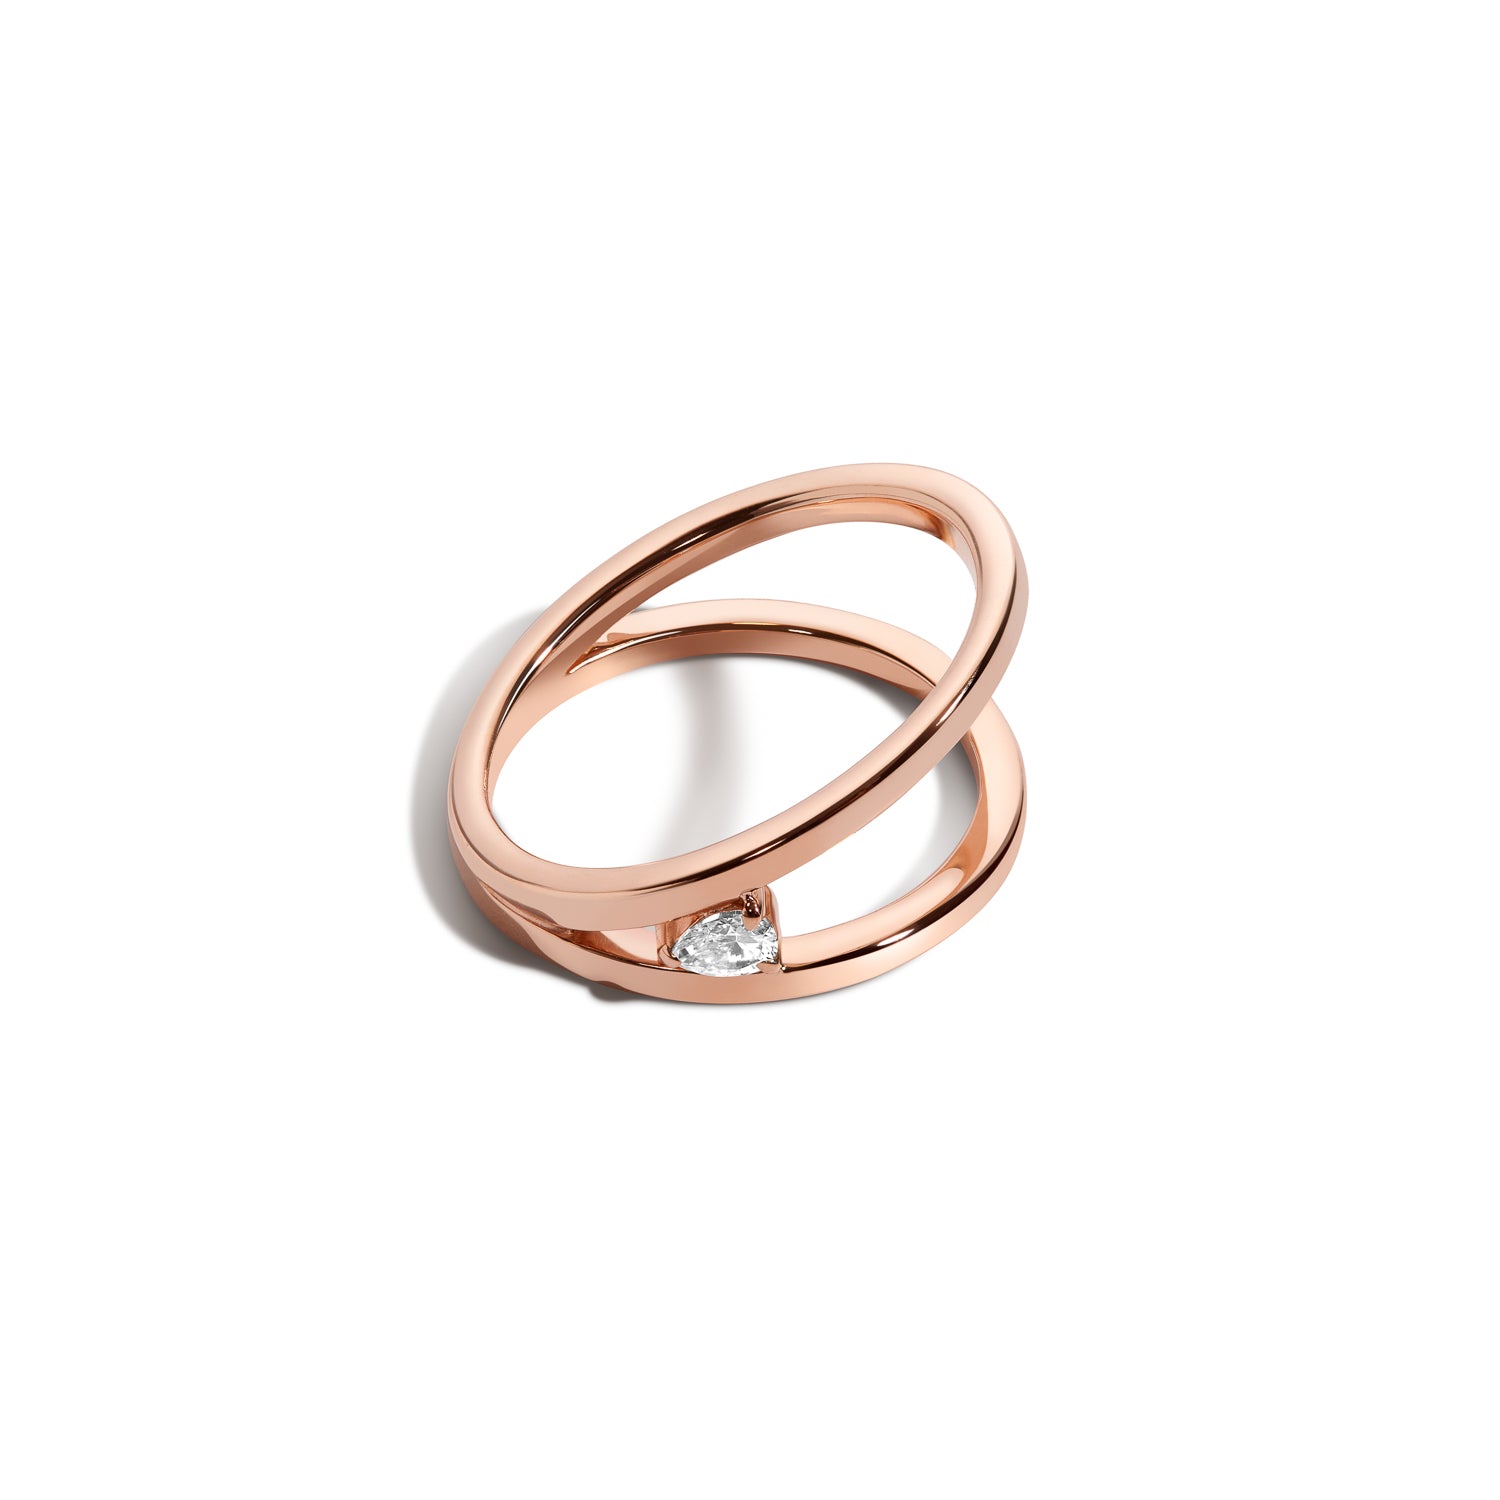 Shahla Karimi Jewelry Love V Ring with Pear 14K Rose Gold